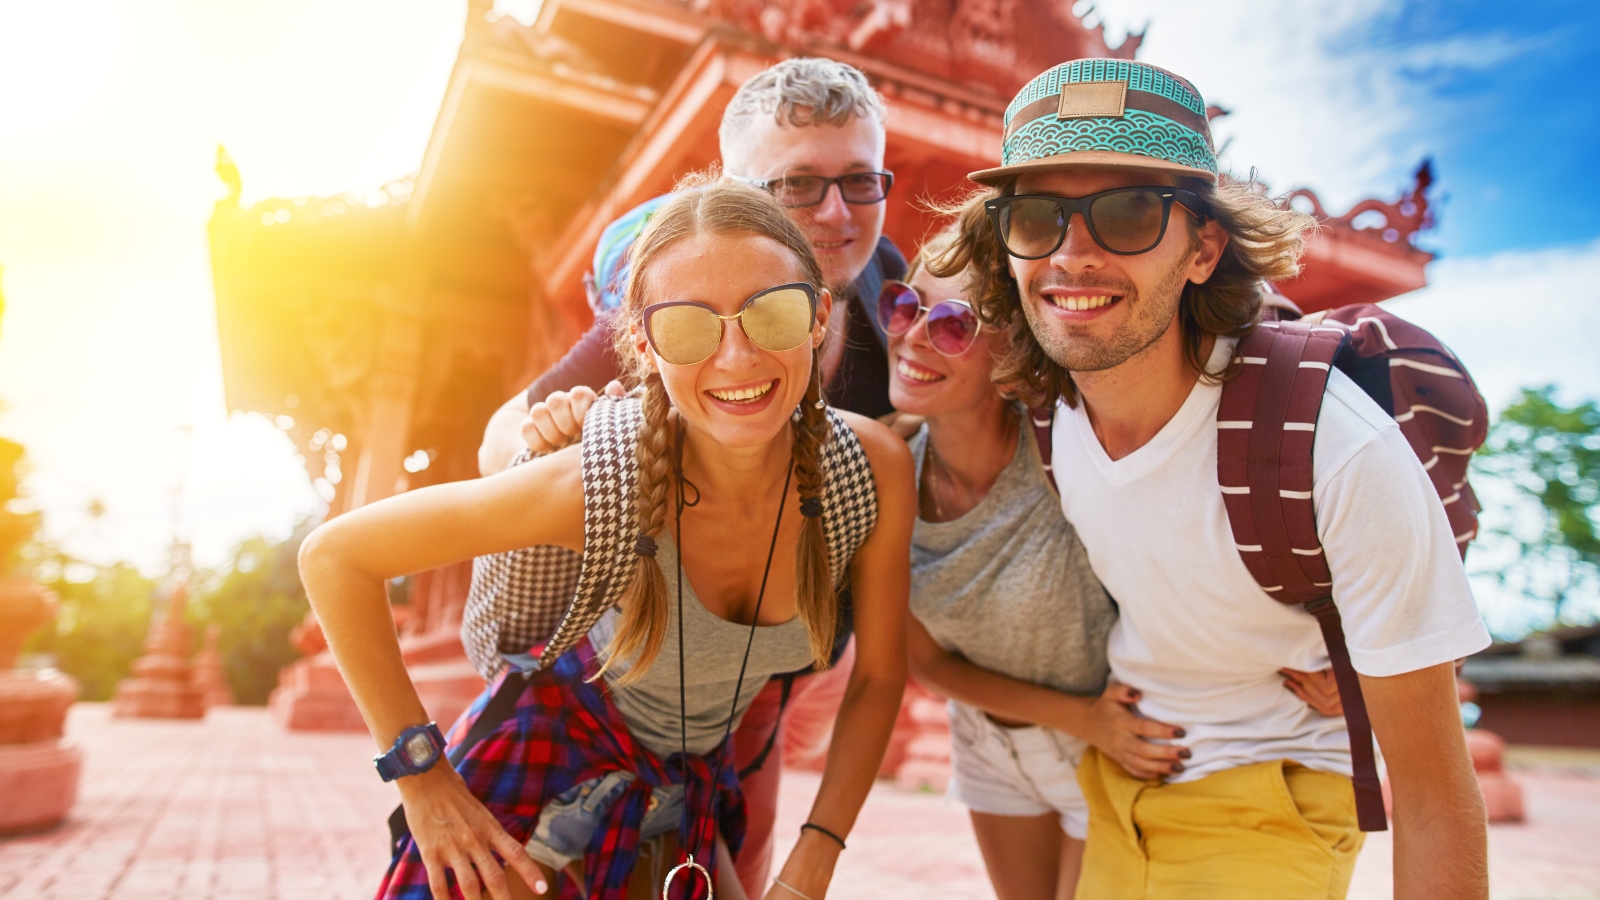 <p><span>Traveling in groups or with a partner can reduce the cost of various aspects of your trip.</span></p> <p><span>Group discounts for accommodation, tours, and activities are often available, and sharing expenses like transportation can significantly reduce costs.</span></p> <p><span>Splitting the cost of accommodations, meals, and even rental cars can make travel more affordable.</span></p> <p><span>The additional benefit of traveling with another person is the company and being able to share the experience.</span></p>